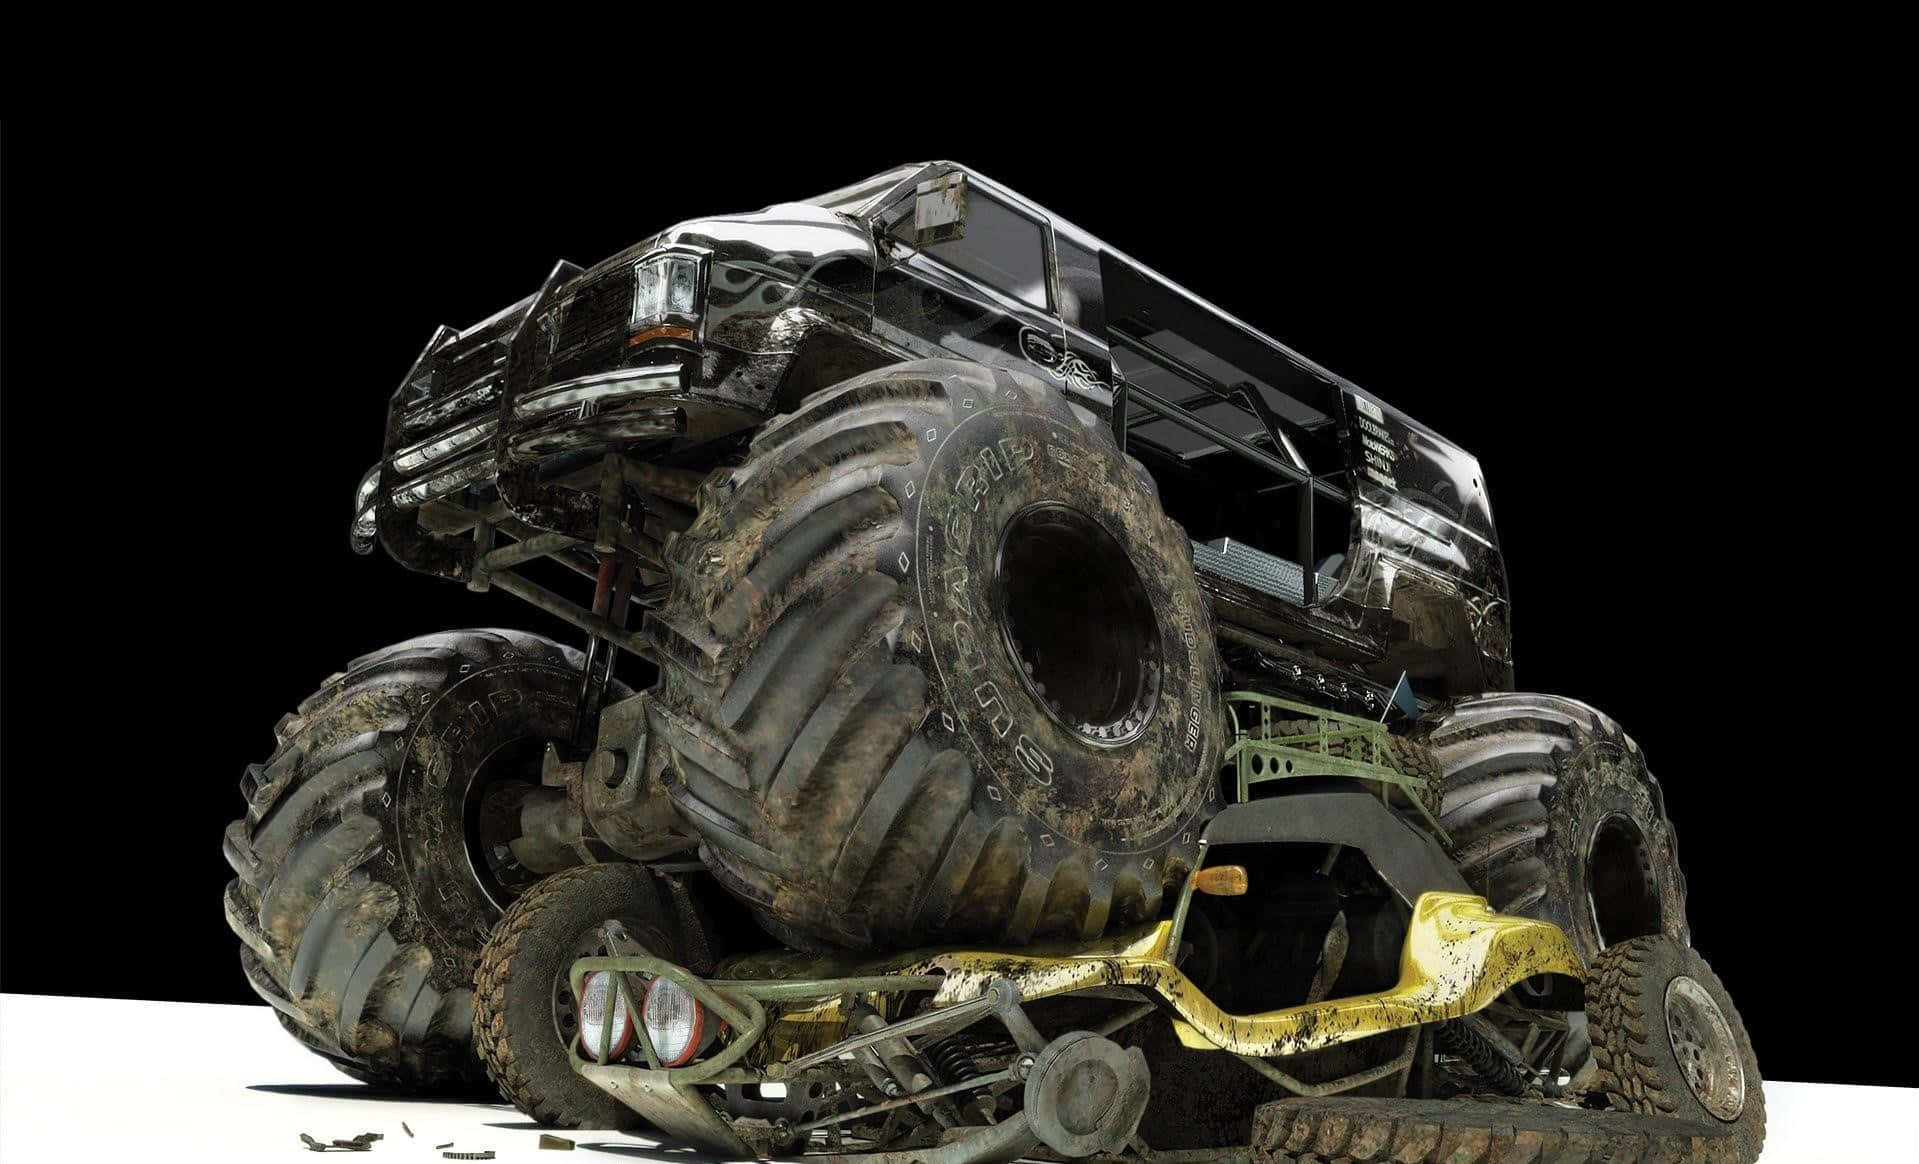 A Monster Truck Is Parked On Top Of Another Vehicle